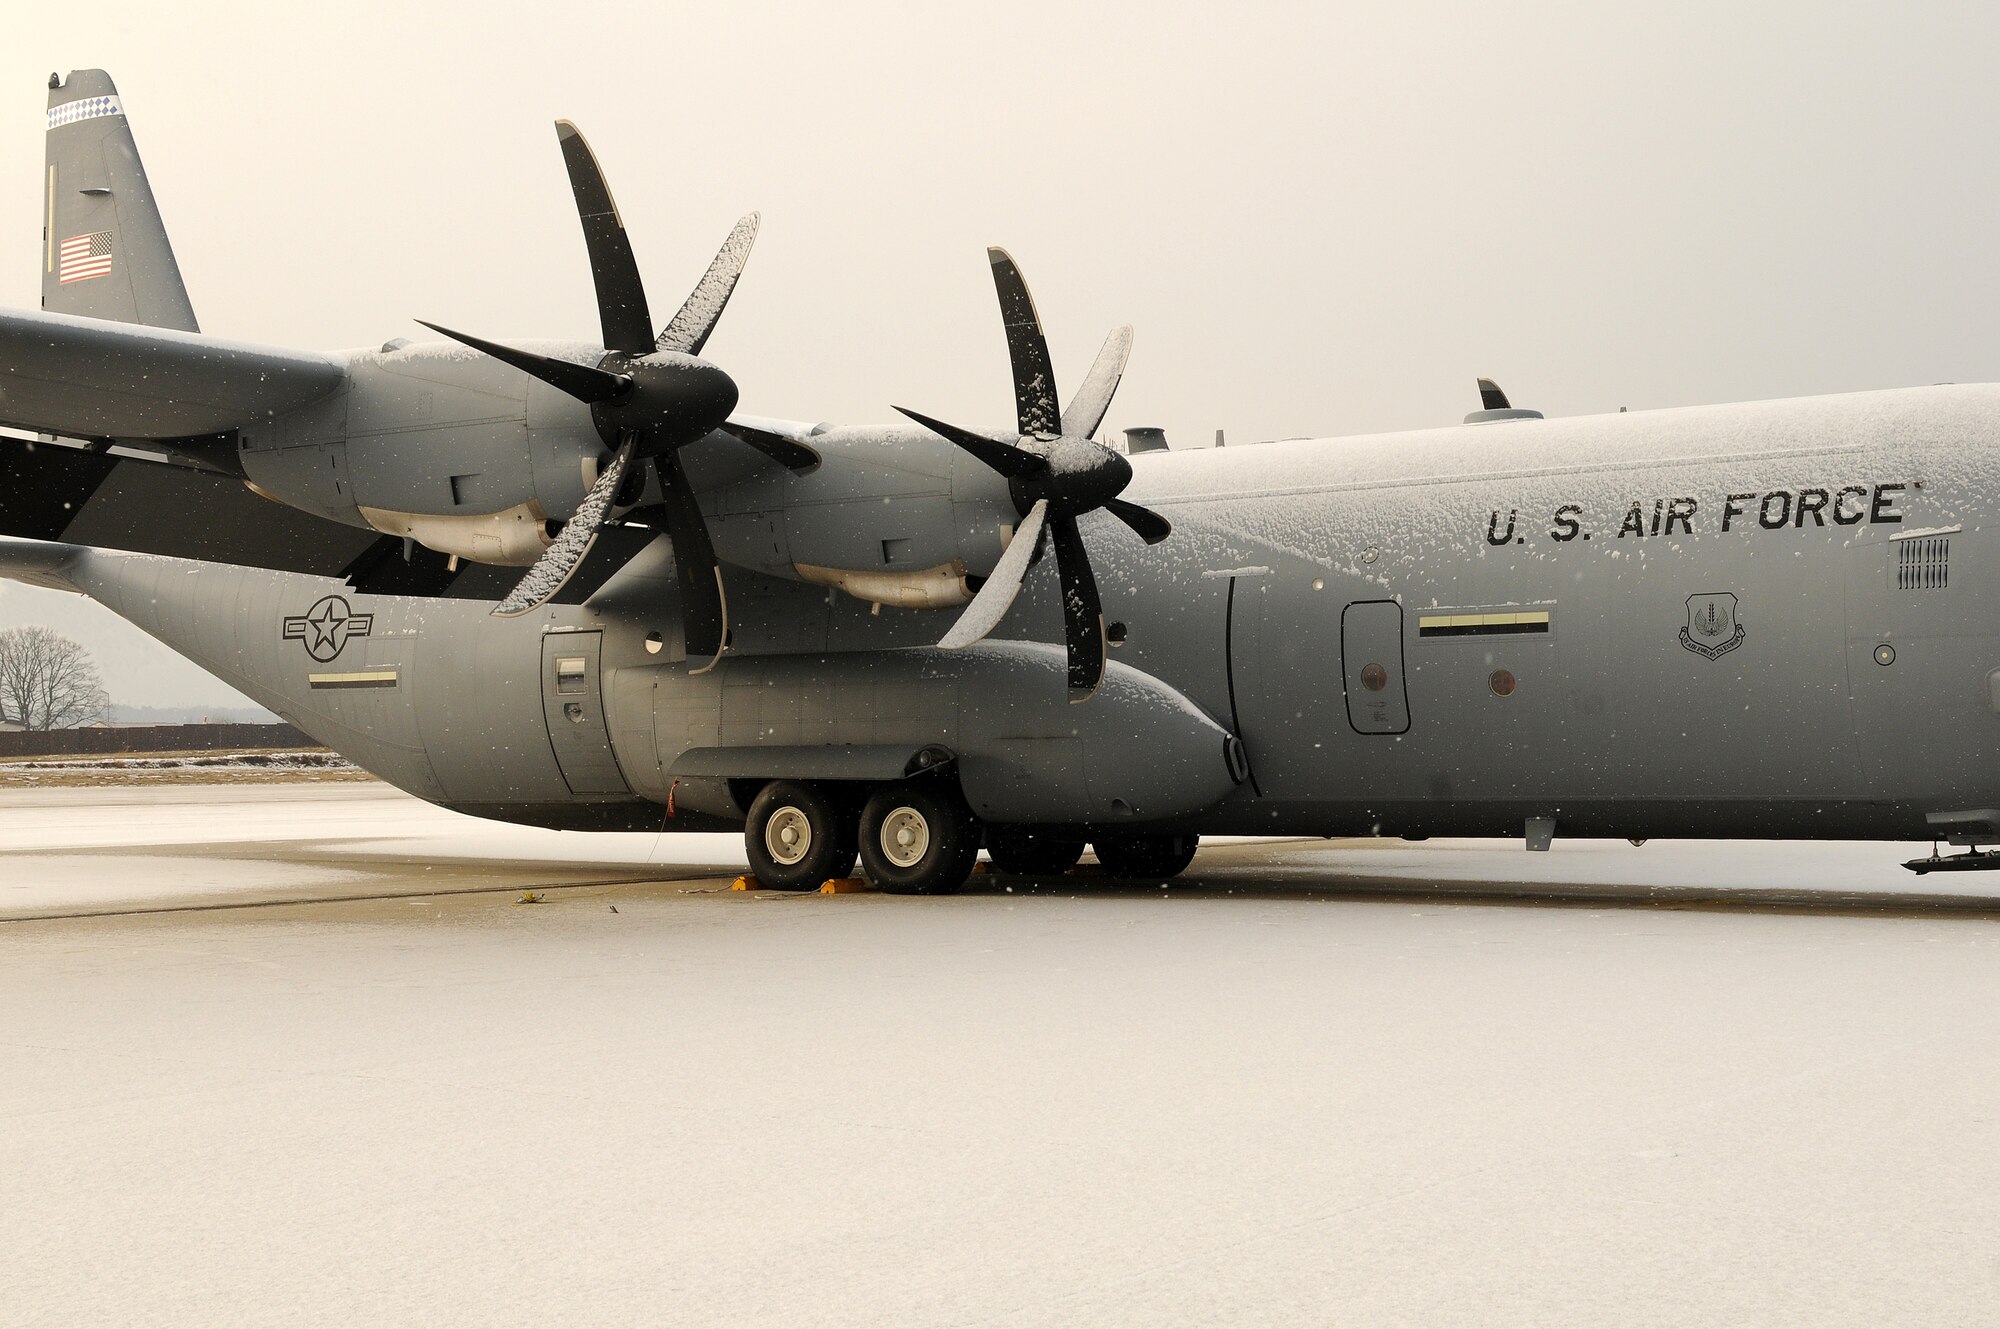 Snow clings to a C-130J as inclement weather descends on Ramstein Air Base, Germany, January 7, 2010. (U.S. Air Force photo by Airman 1st Class Brea Miller)